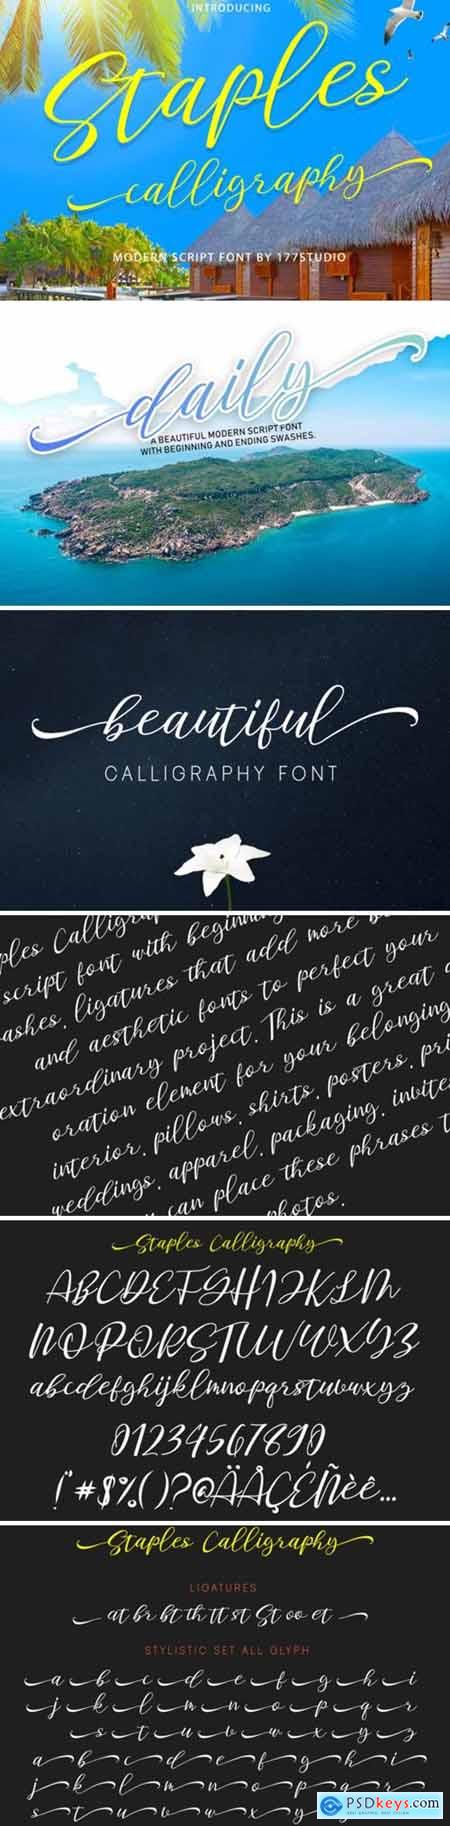 Staples Calligraphy Font